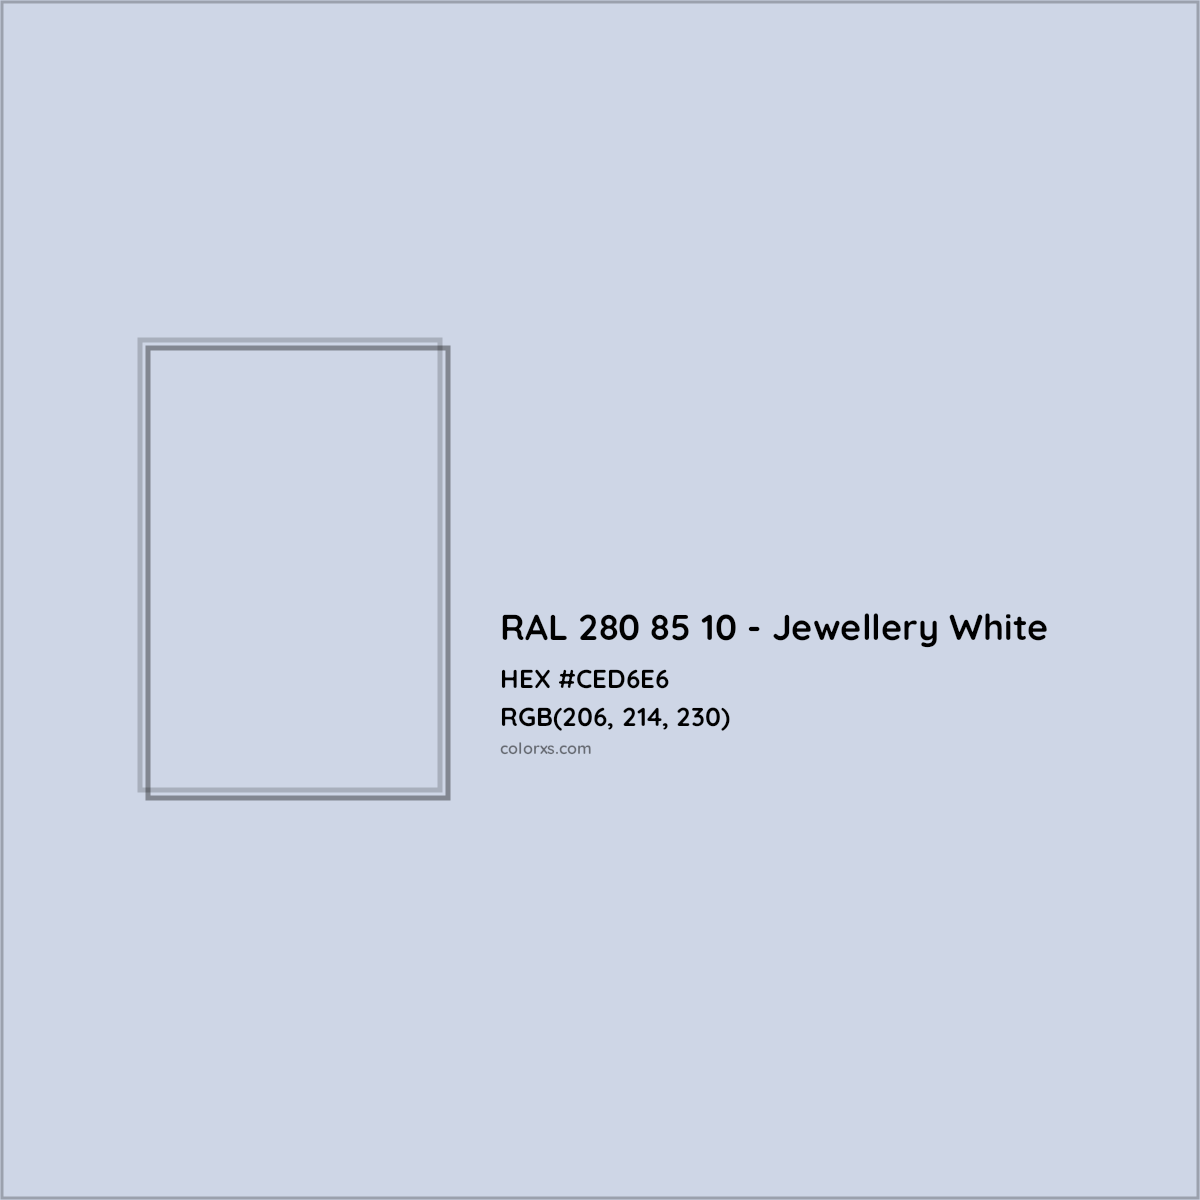 HEX #CED6E6 RAL 280 85 10 - Jewellery White CMS RAL Design - Color Code